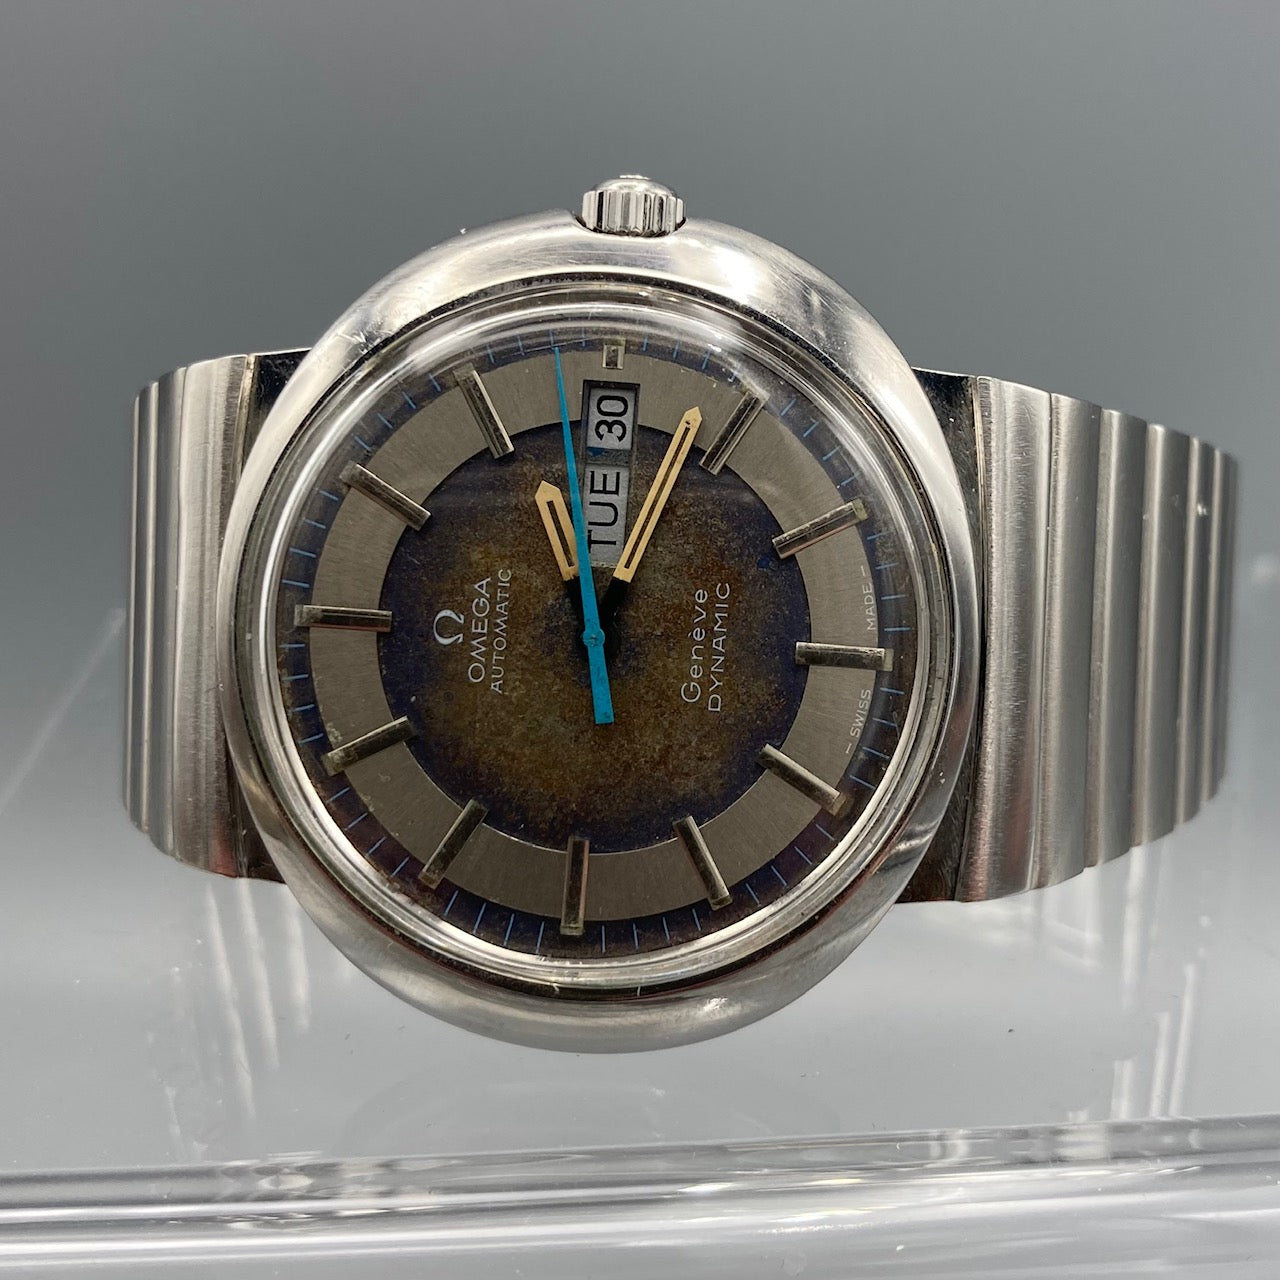 Omega Dynamic Automatic Day/Date Vintage Watch - 166.108